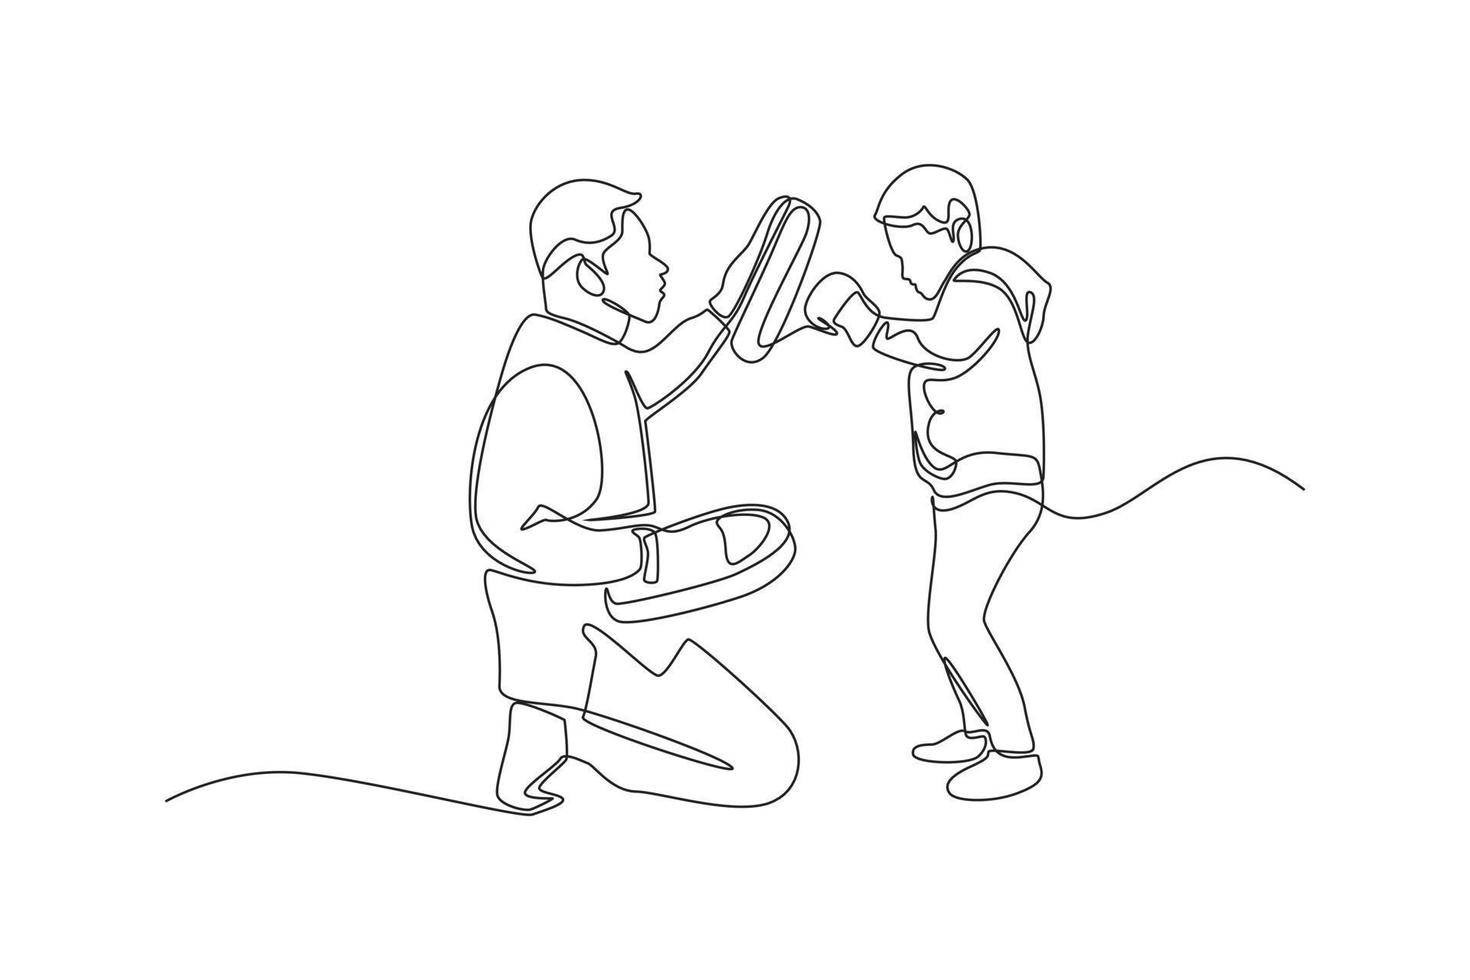 Single one line drawing father boxing Exercises Training with his son. Family time concept. Continuous line draw design graphic vector illustration.